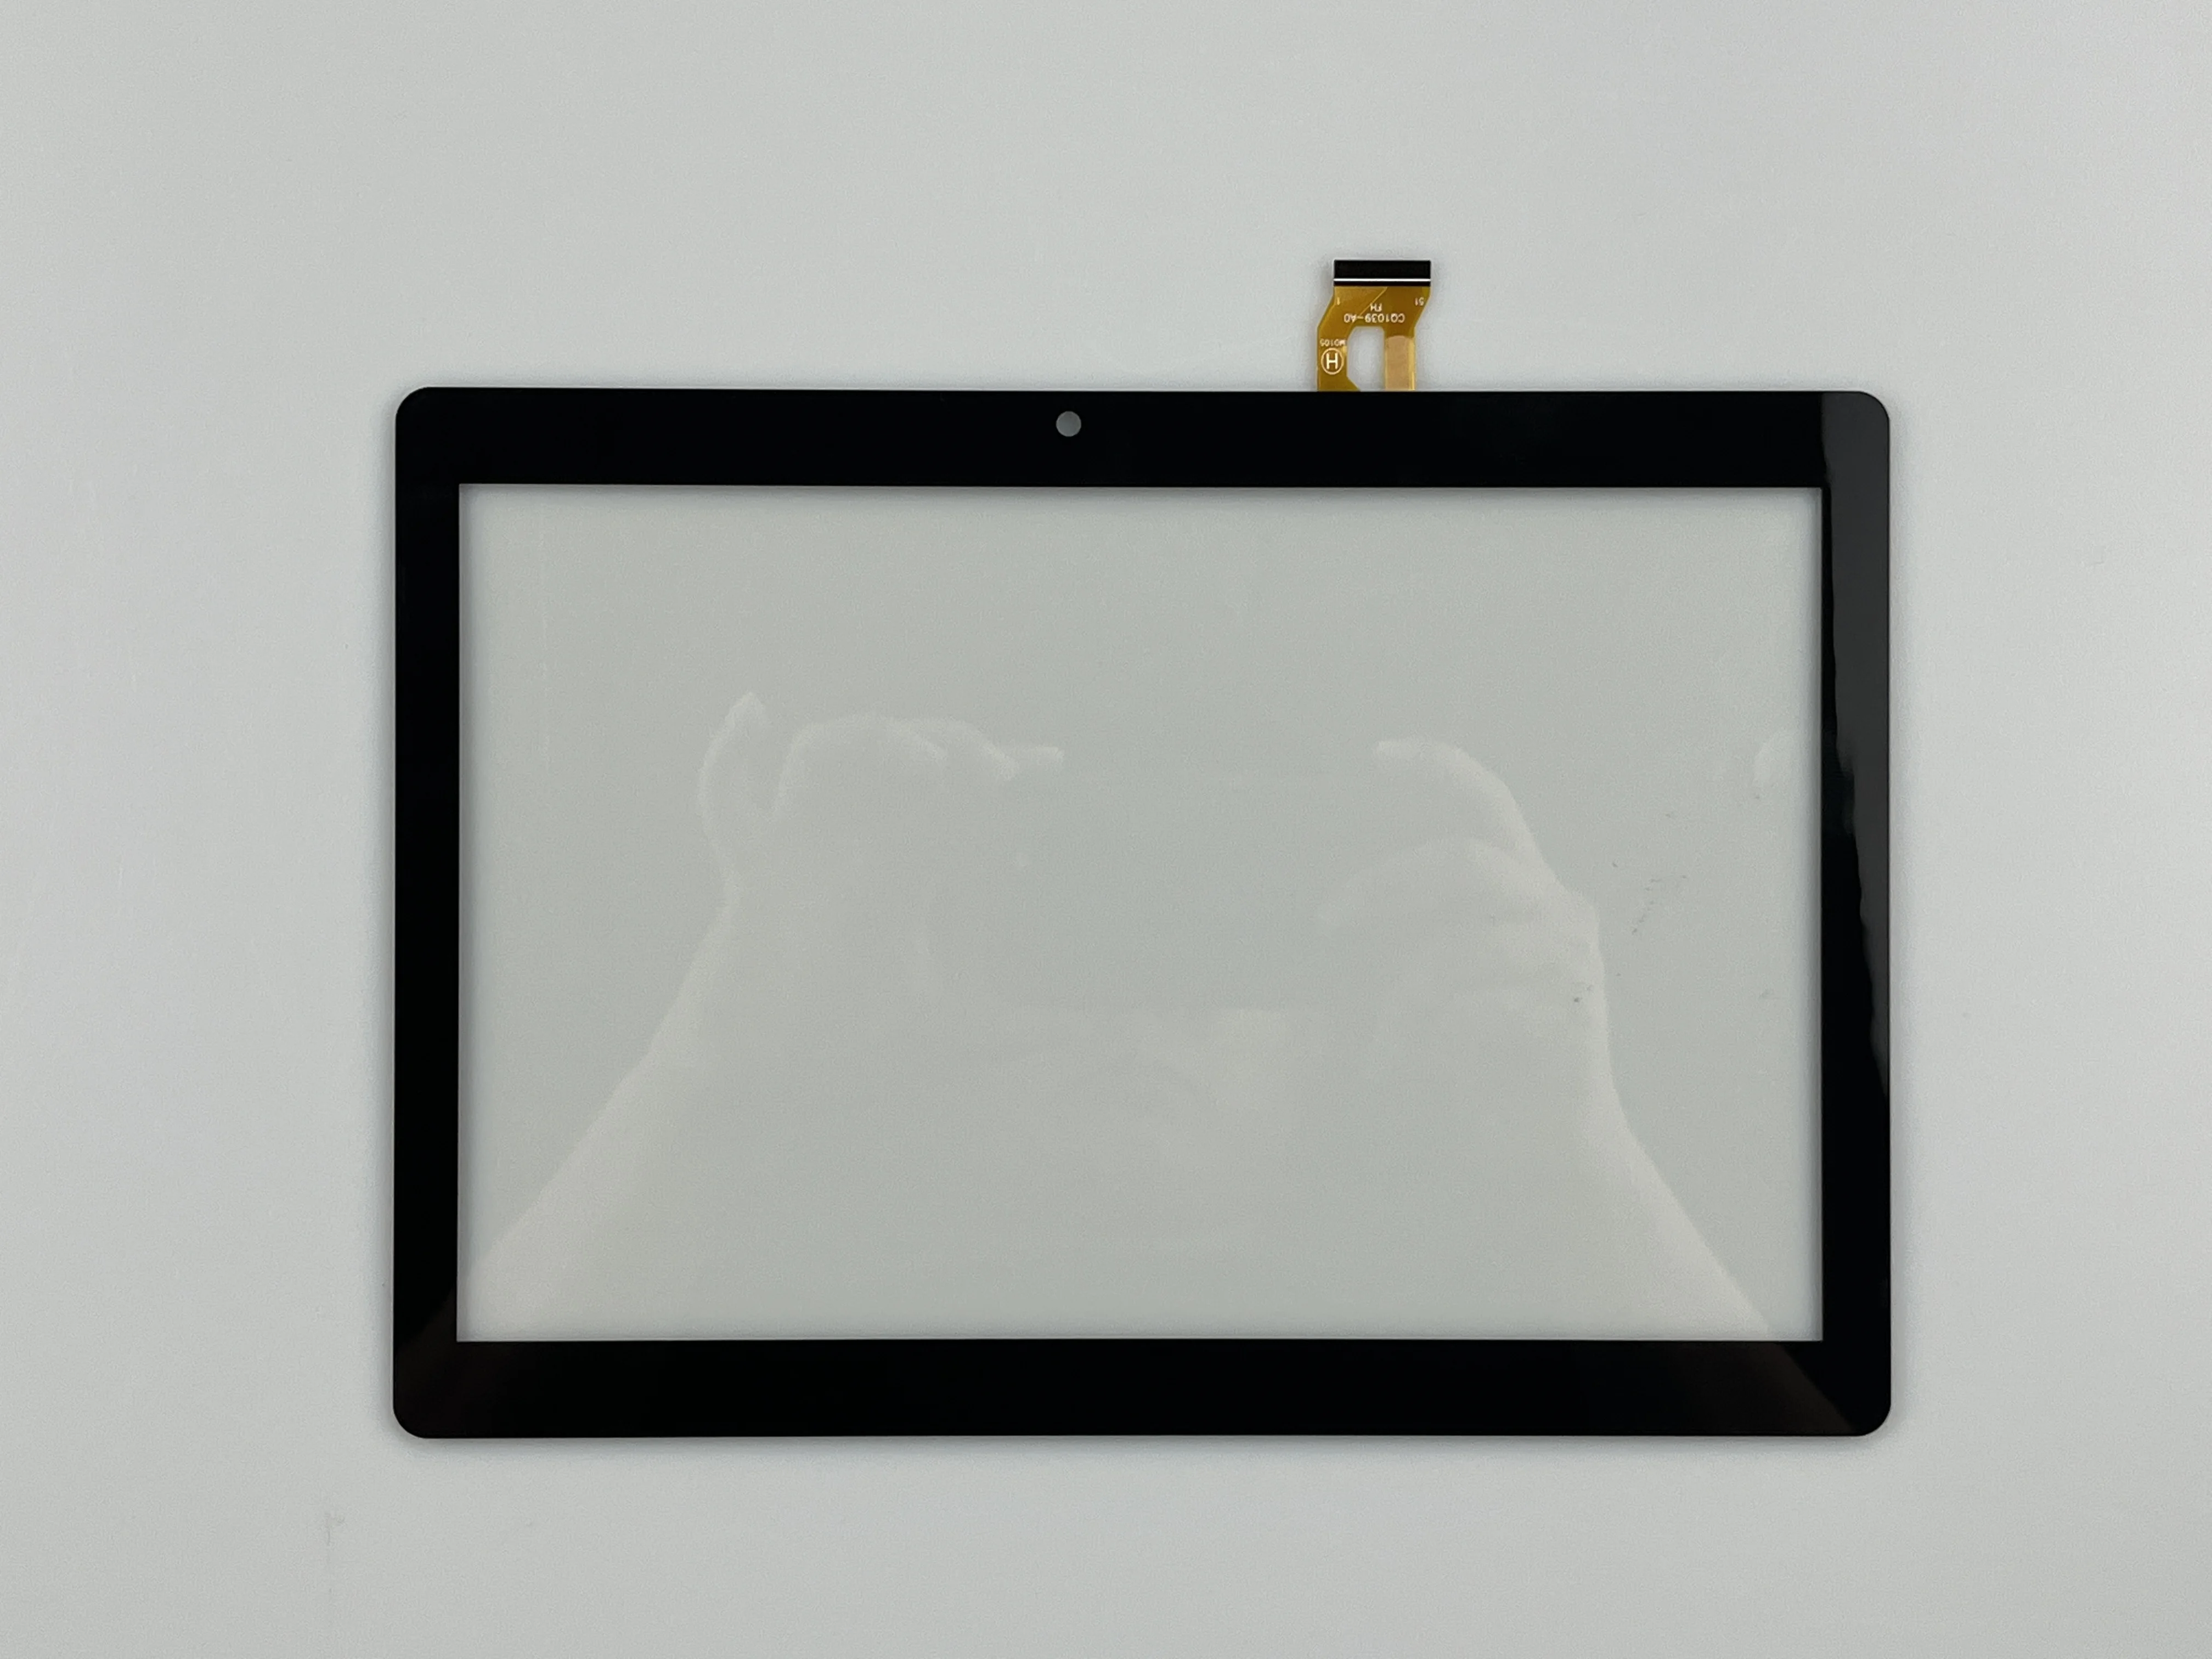 

New 10.1 Inch Black P/N CQ1039-A0 MO105 Tablet Capacitive Touch Screen Digitizer Sensor For Multilaser m10 4g AC